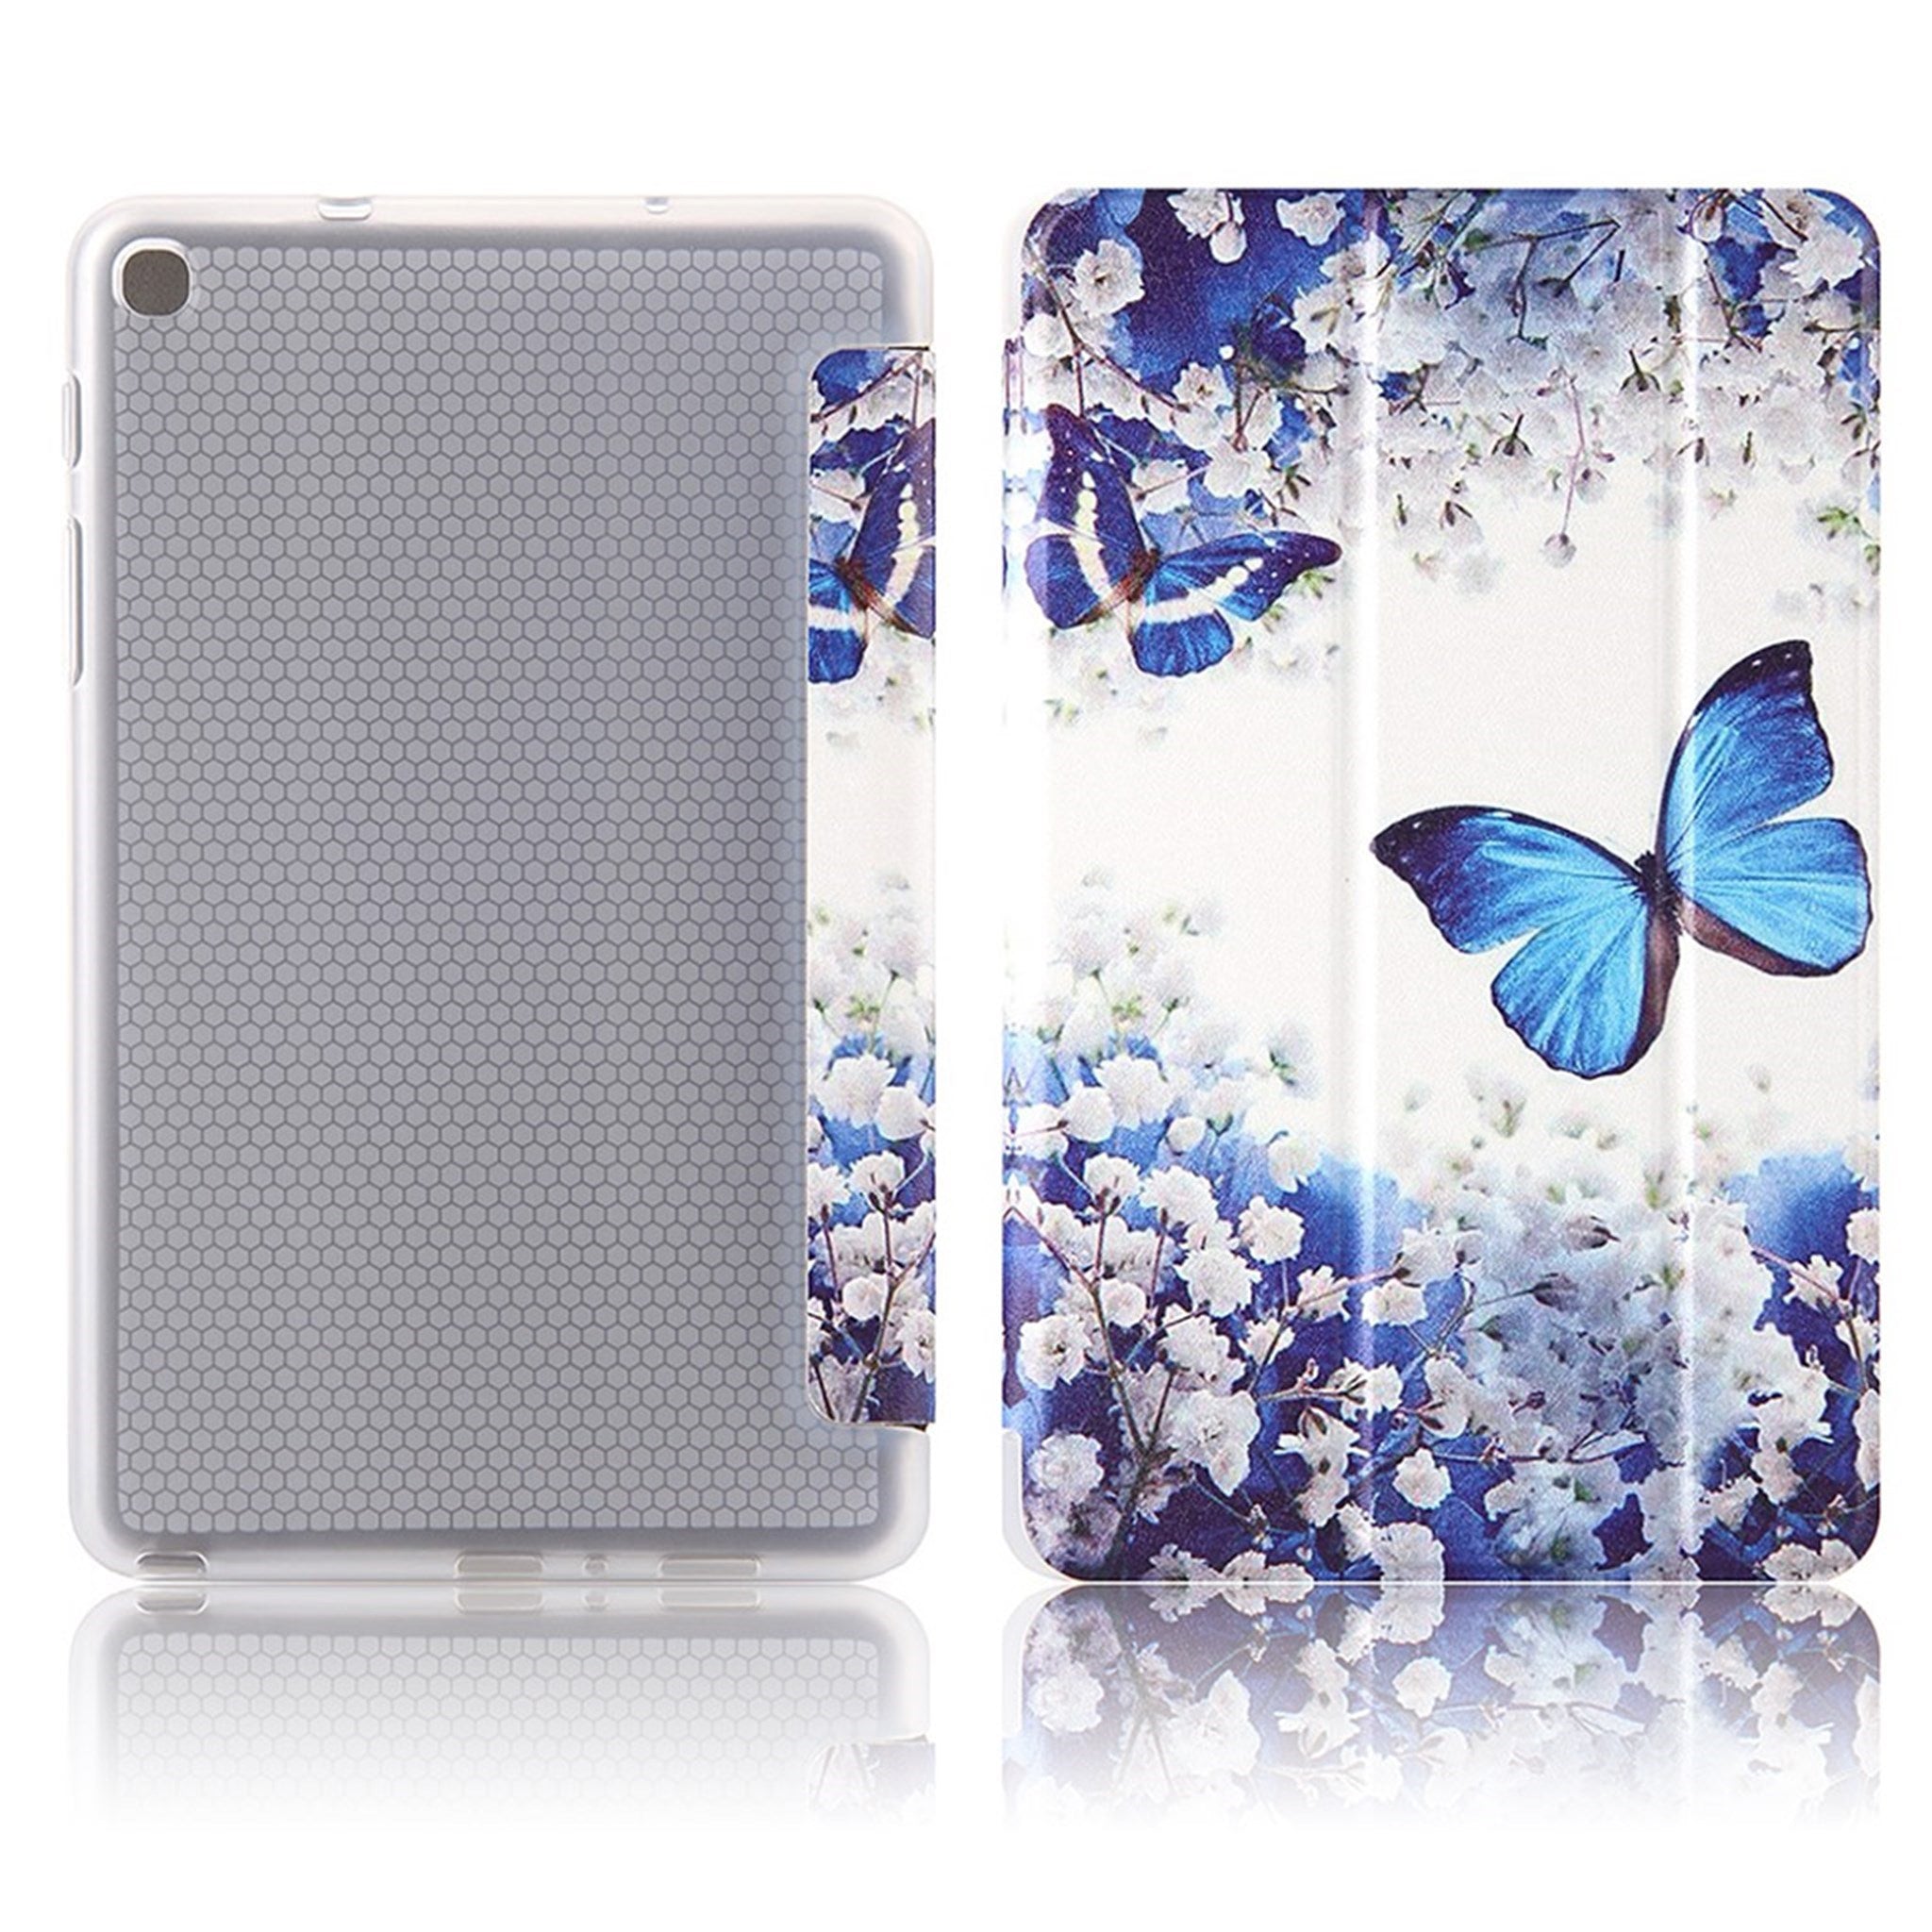 Samsung Galaxy Tab A 8.0 + S Pen (2019) patterned tri-fold leather case - Blue Butterfly